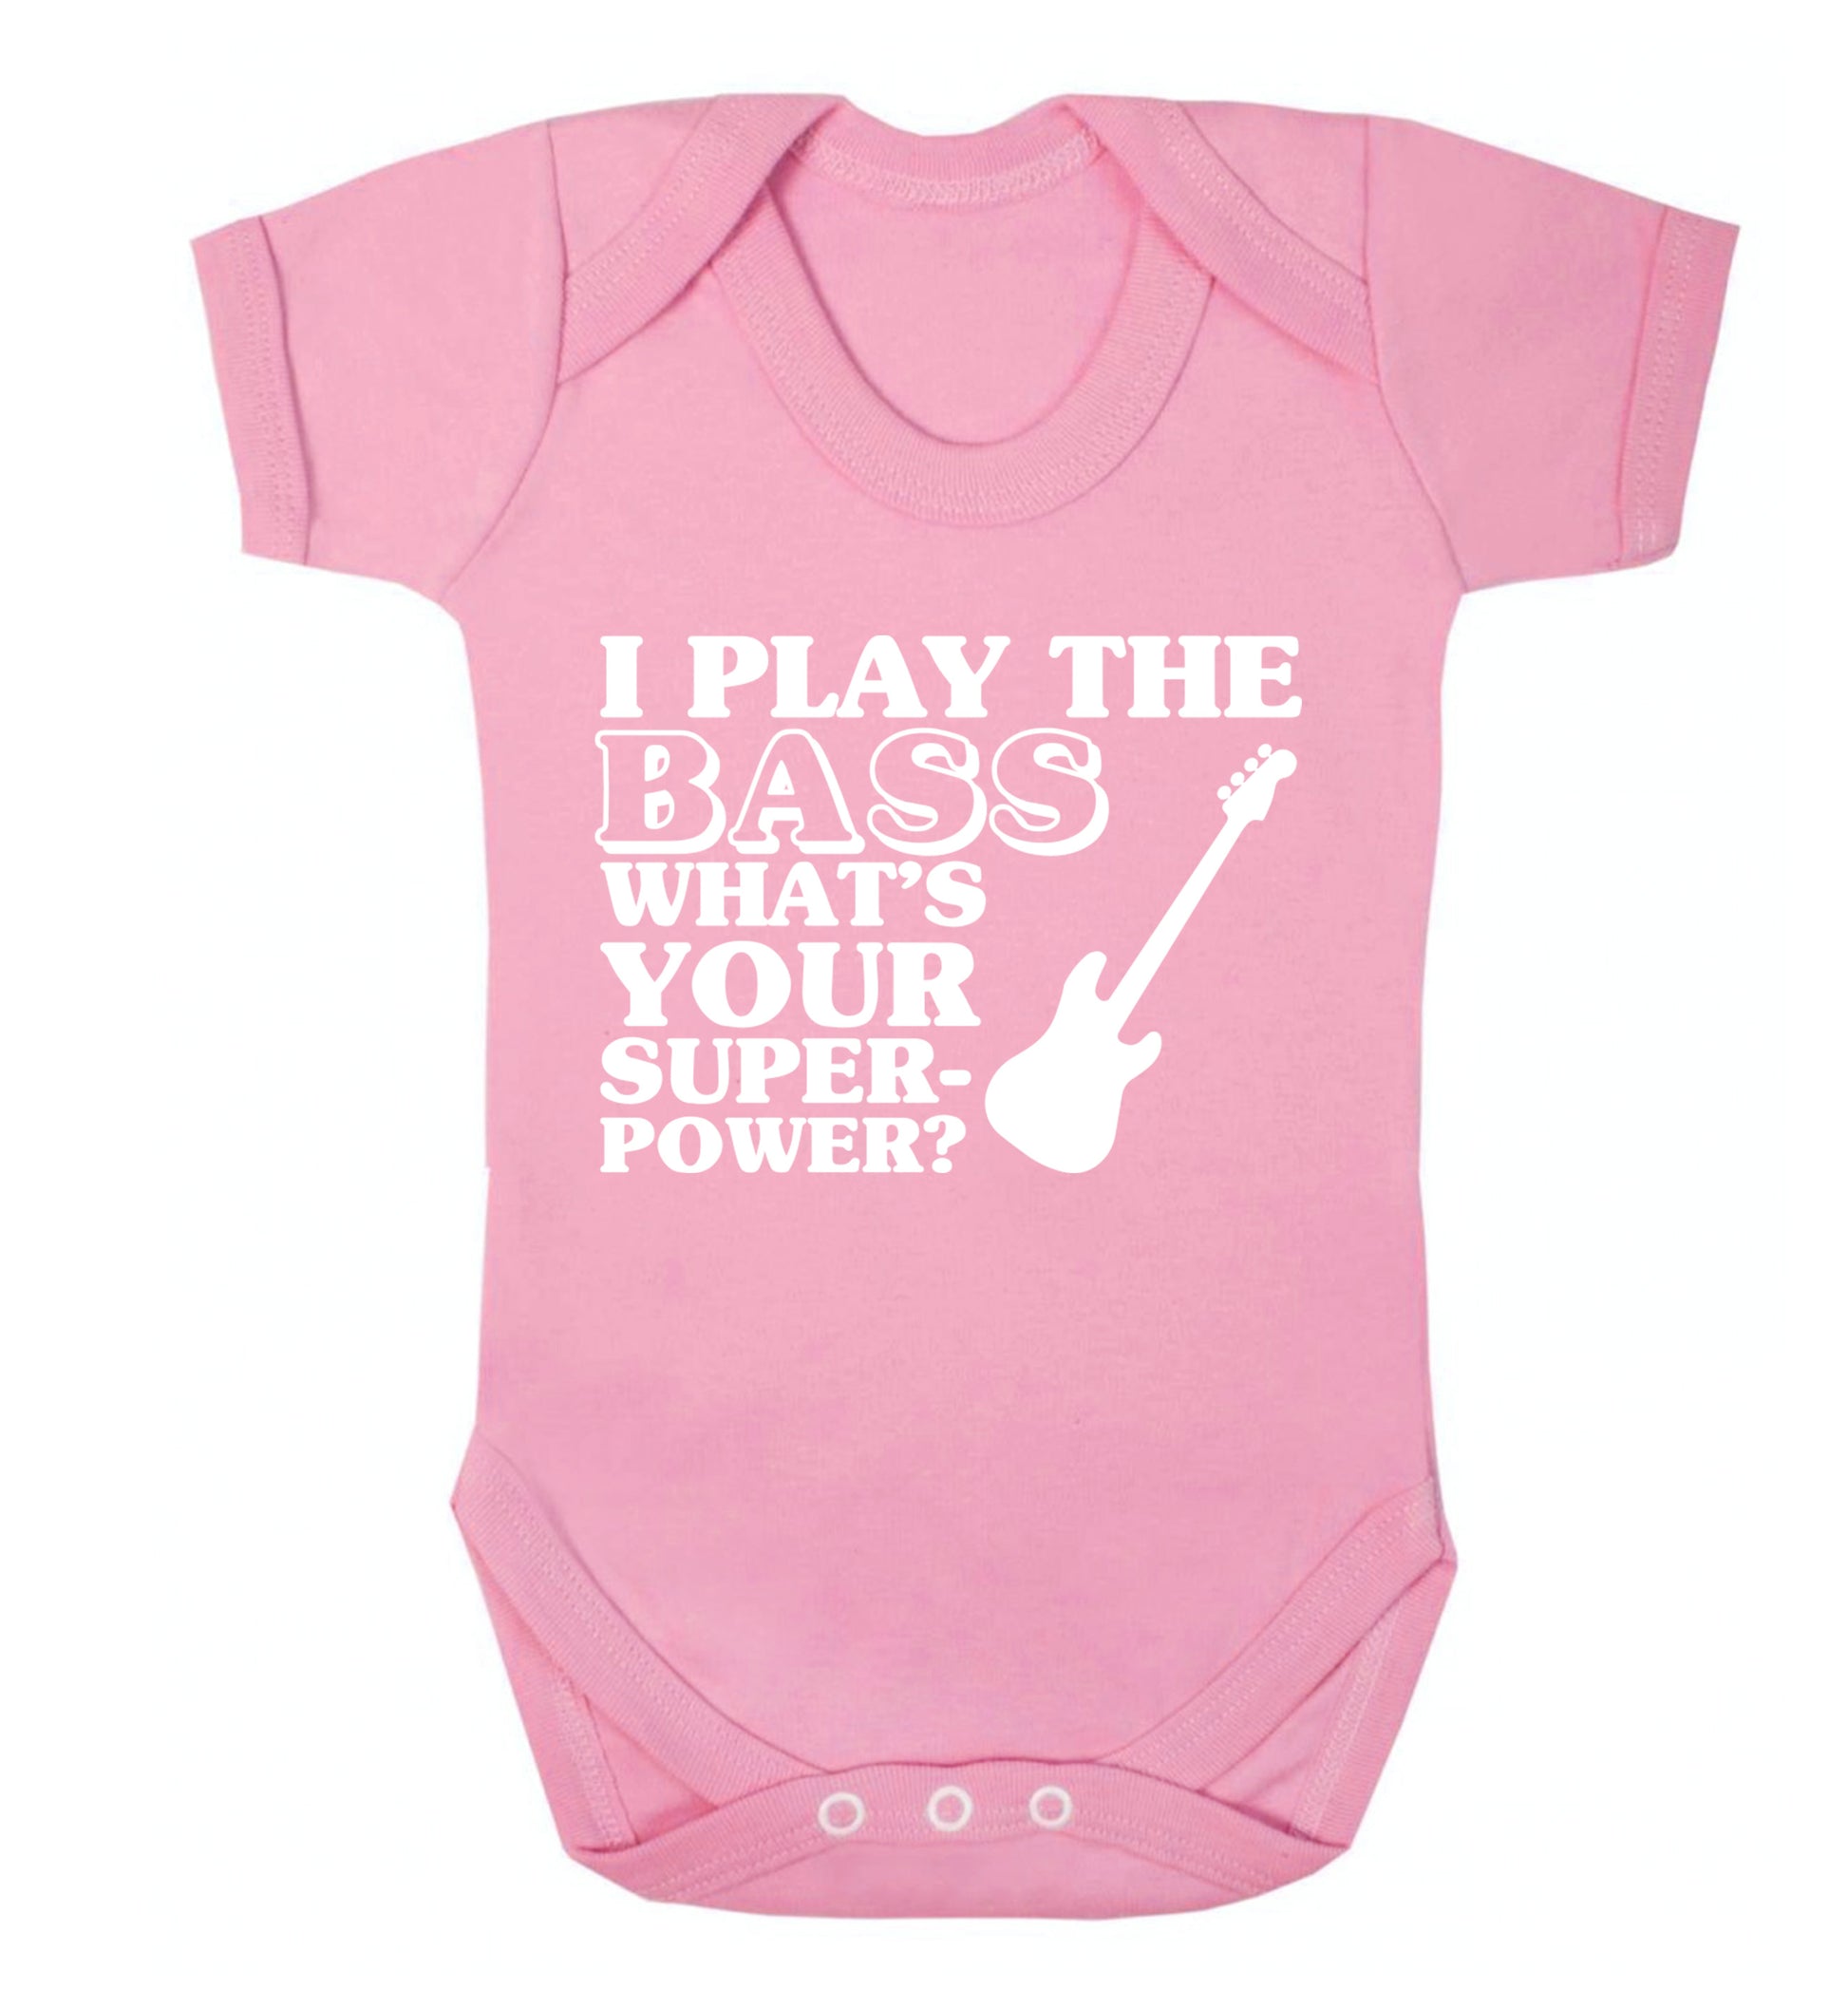 I play the bass what's your superpower? Baby Vest pale pink 18-24 months